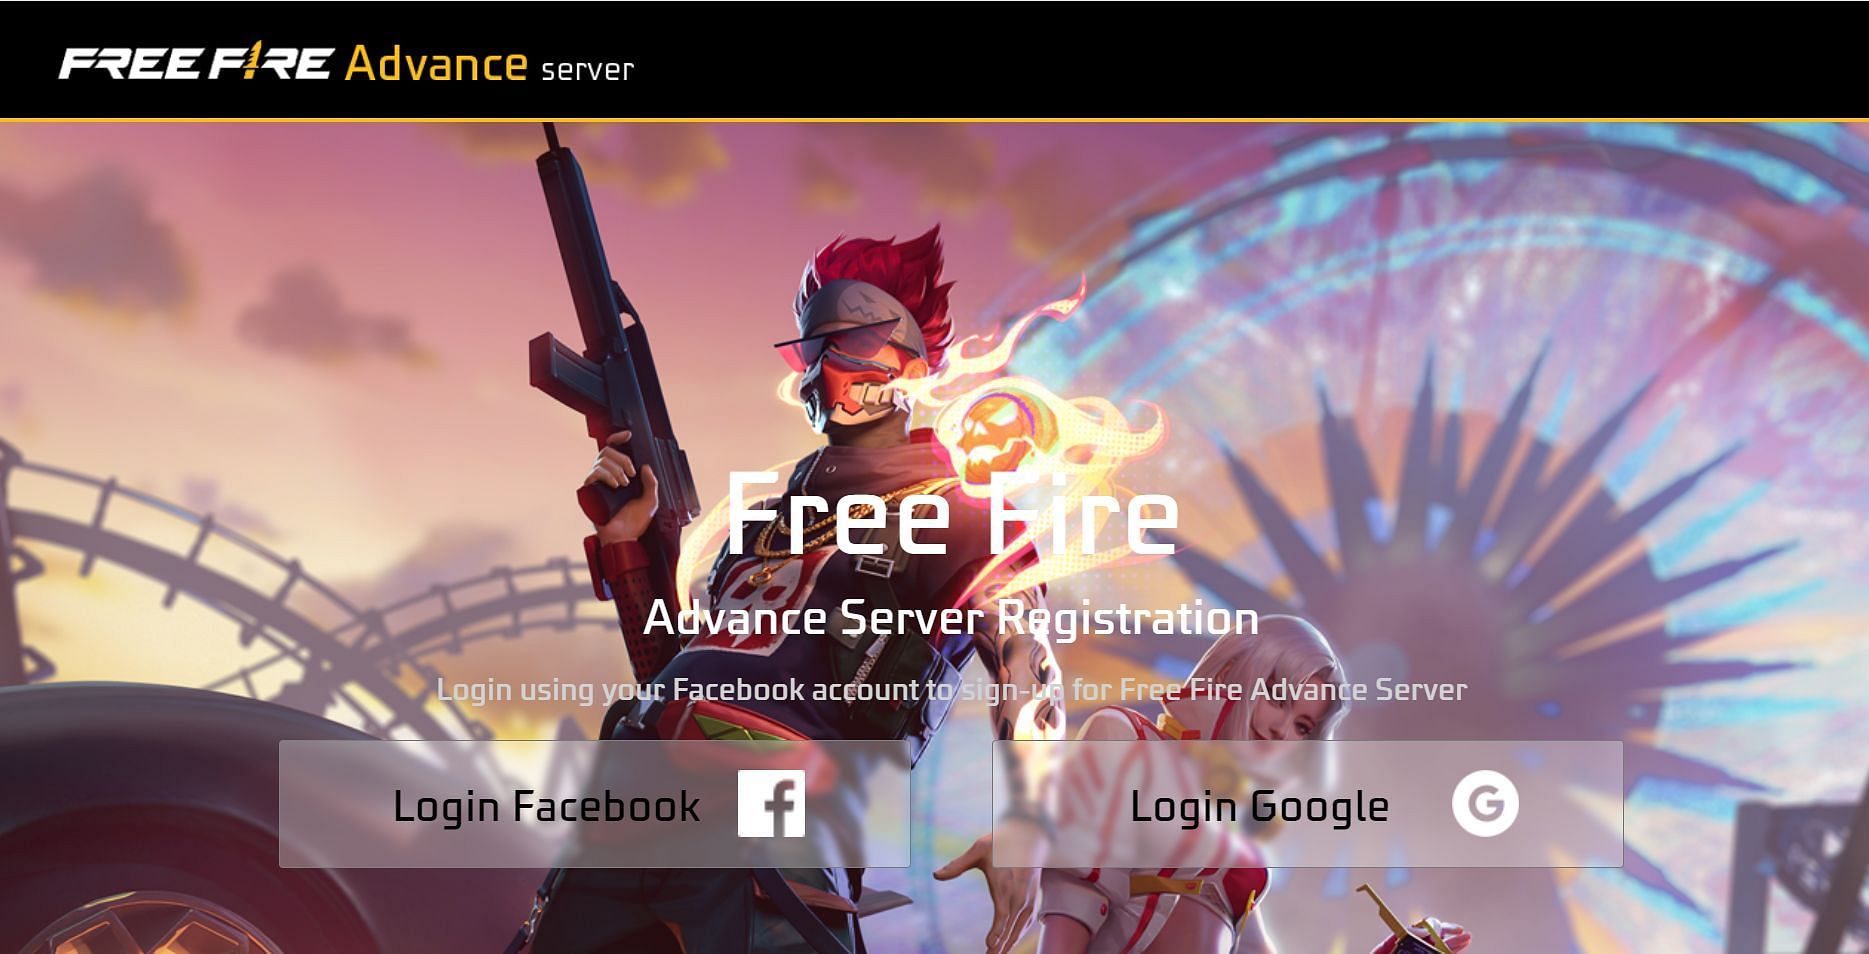 Sign in and set up the account to download the file (Image via Garena)